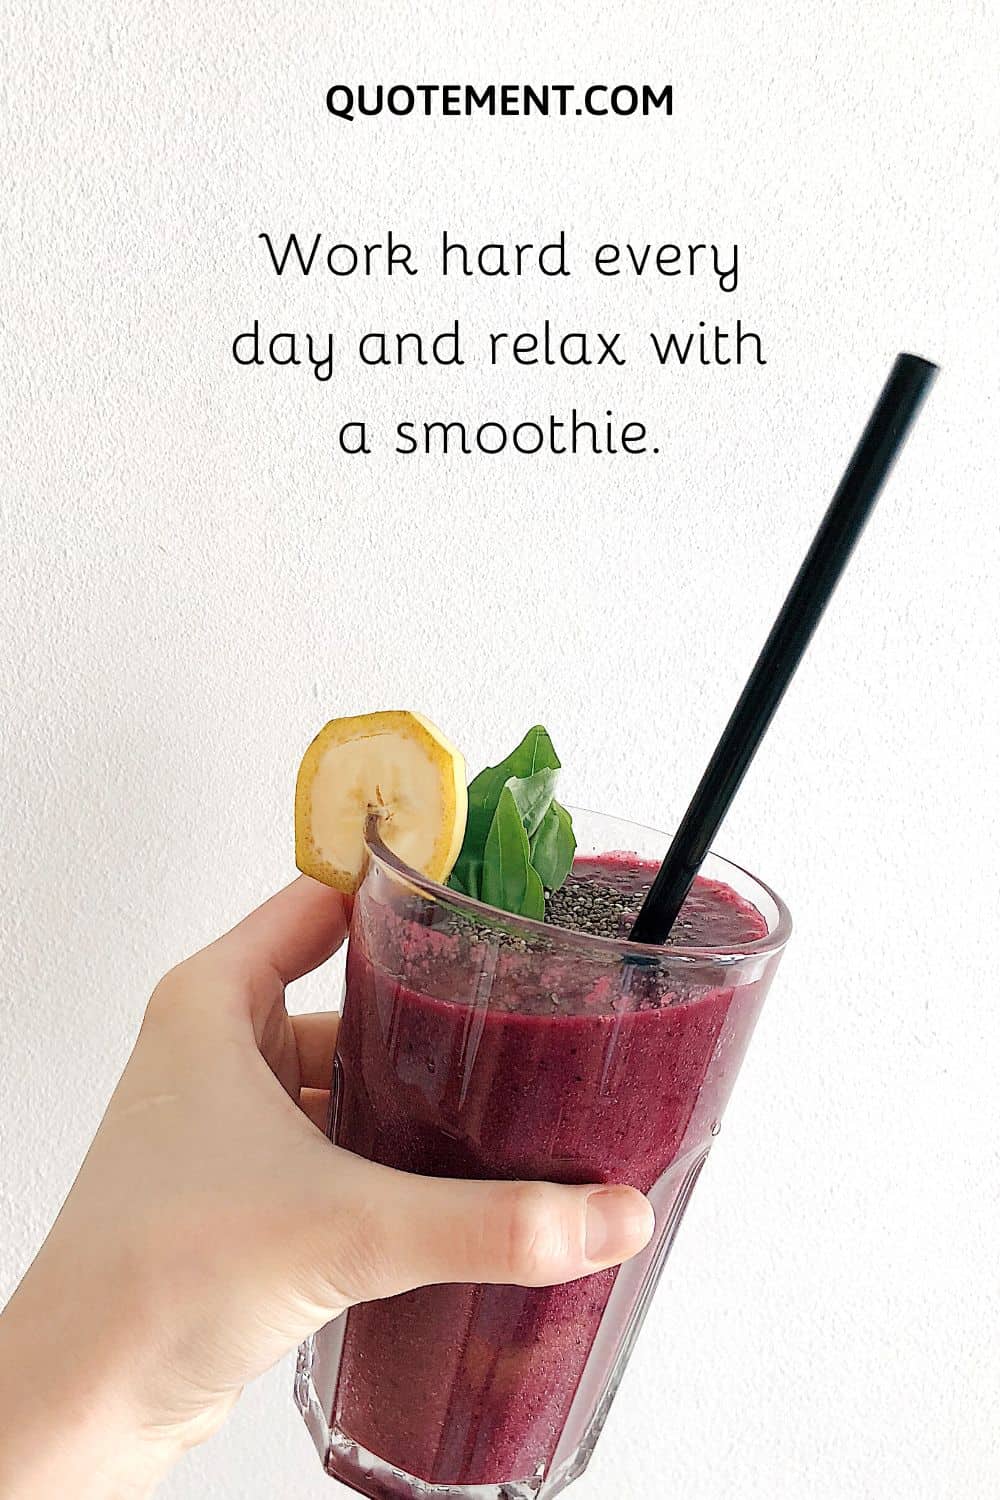 Work hard every day and relax with a smoothie.